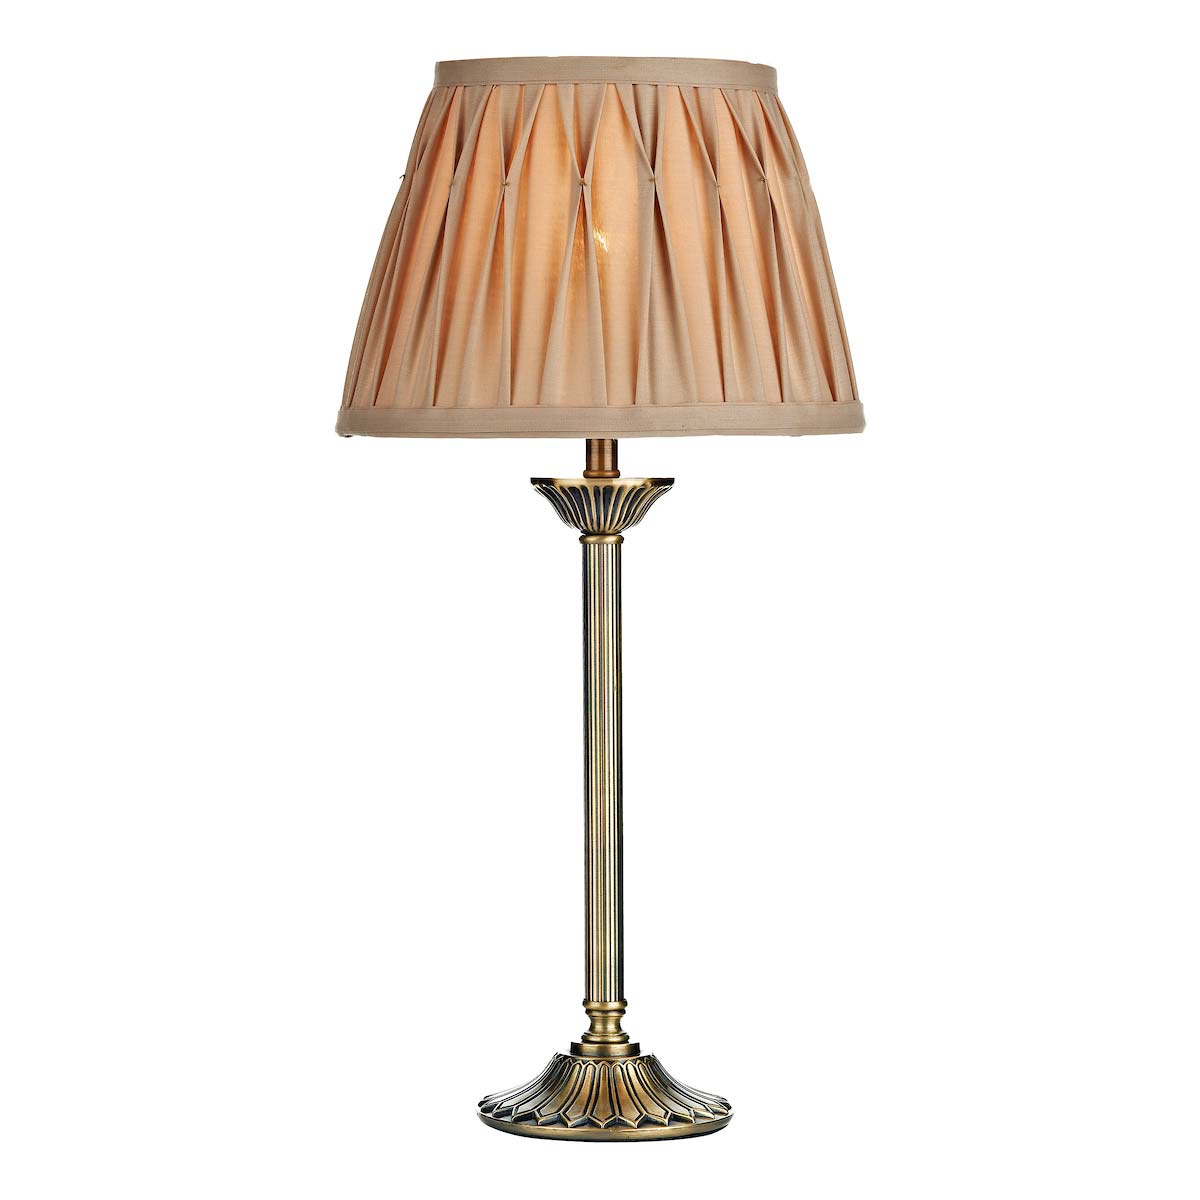 Dar Hatton 1 Light Candlestick Table, Fluted Candlestick Antique Brass Table Lamp Base